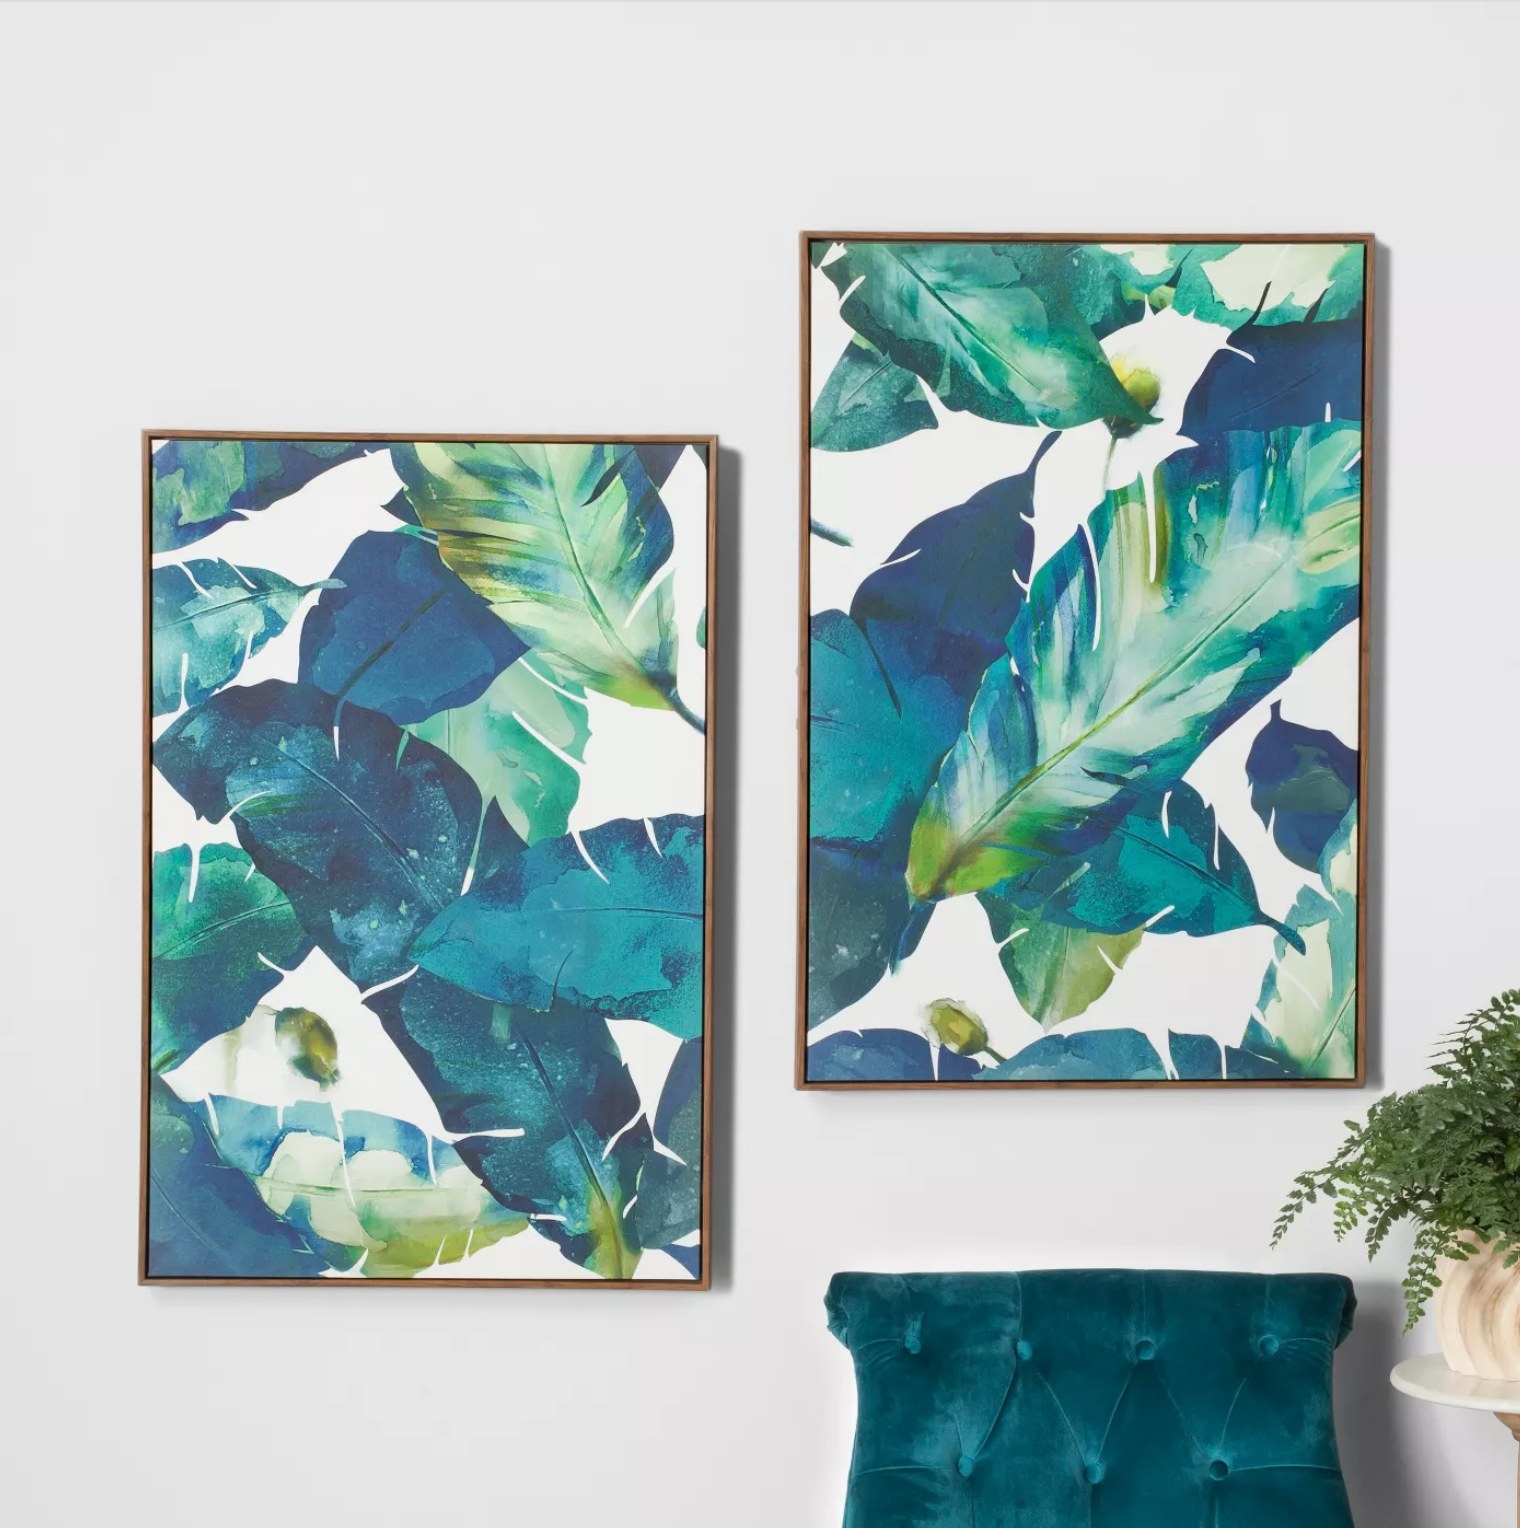 The art of blue and green leaves